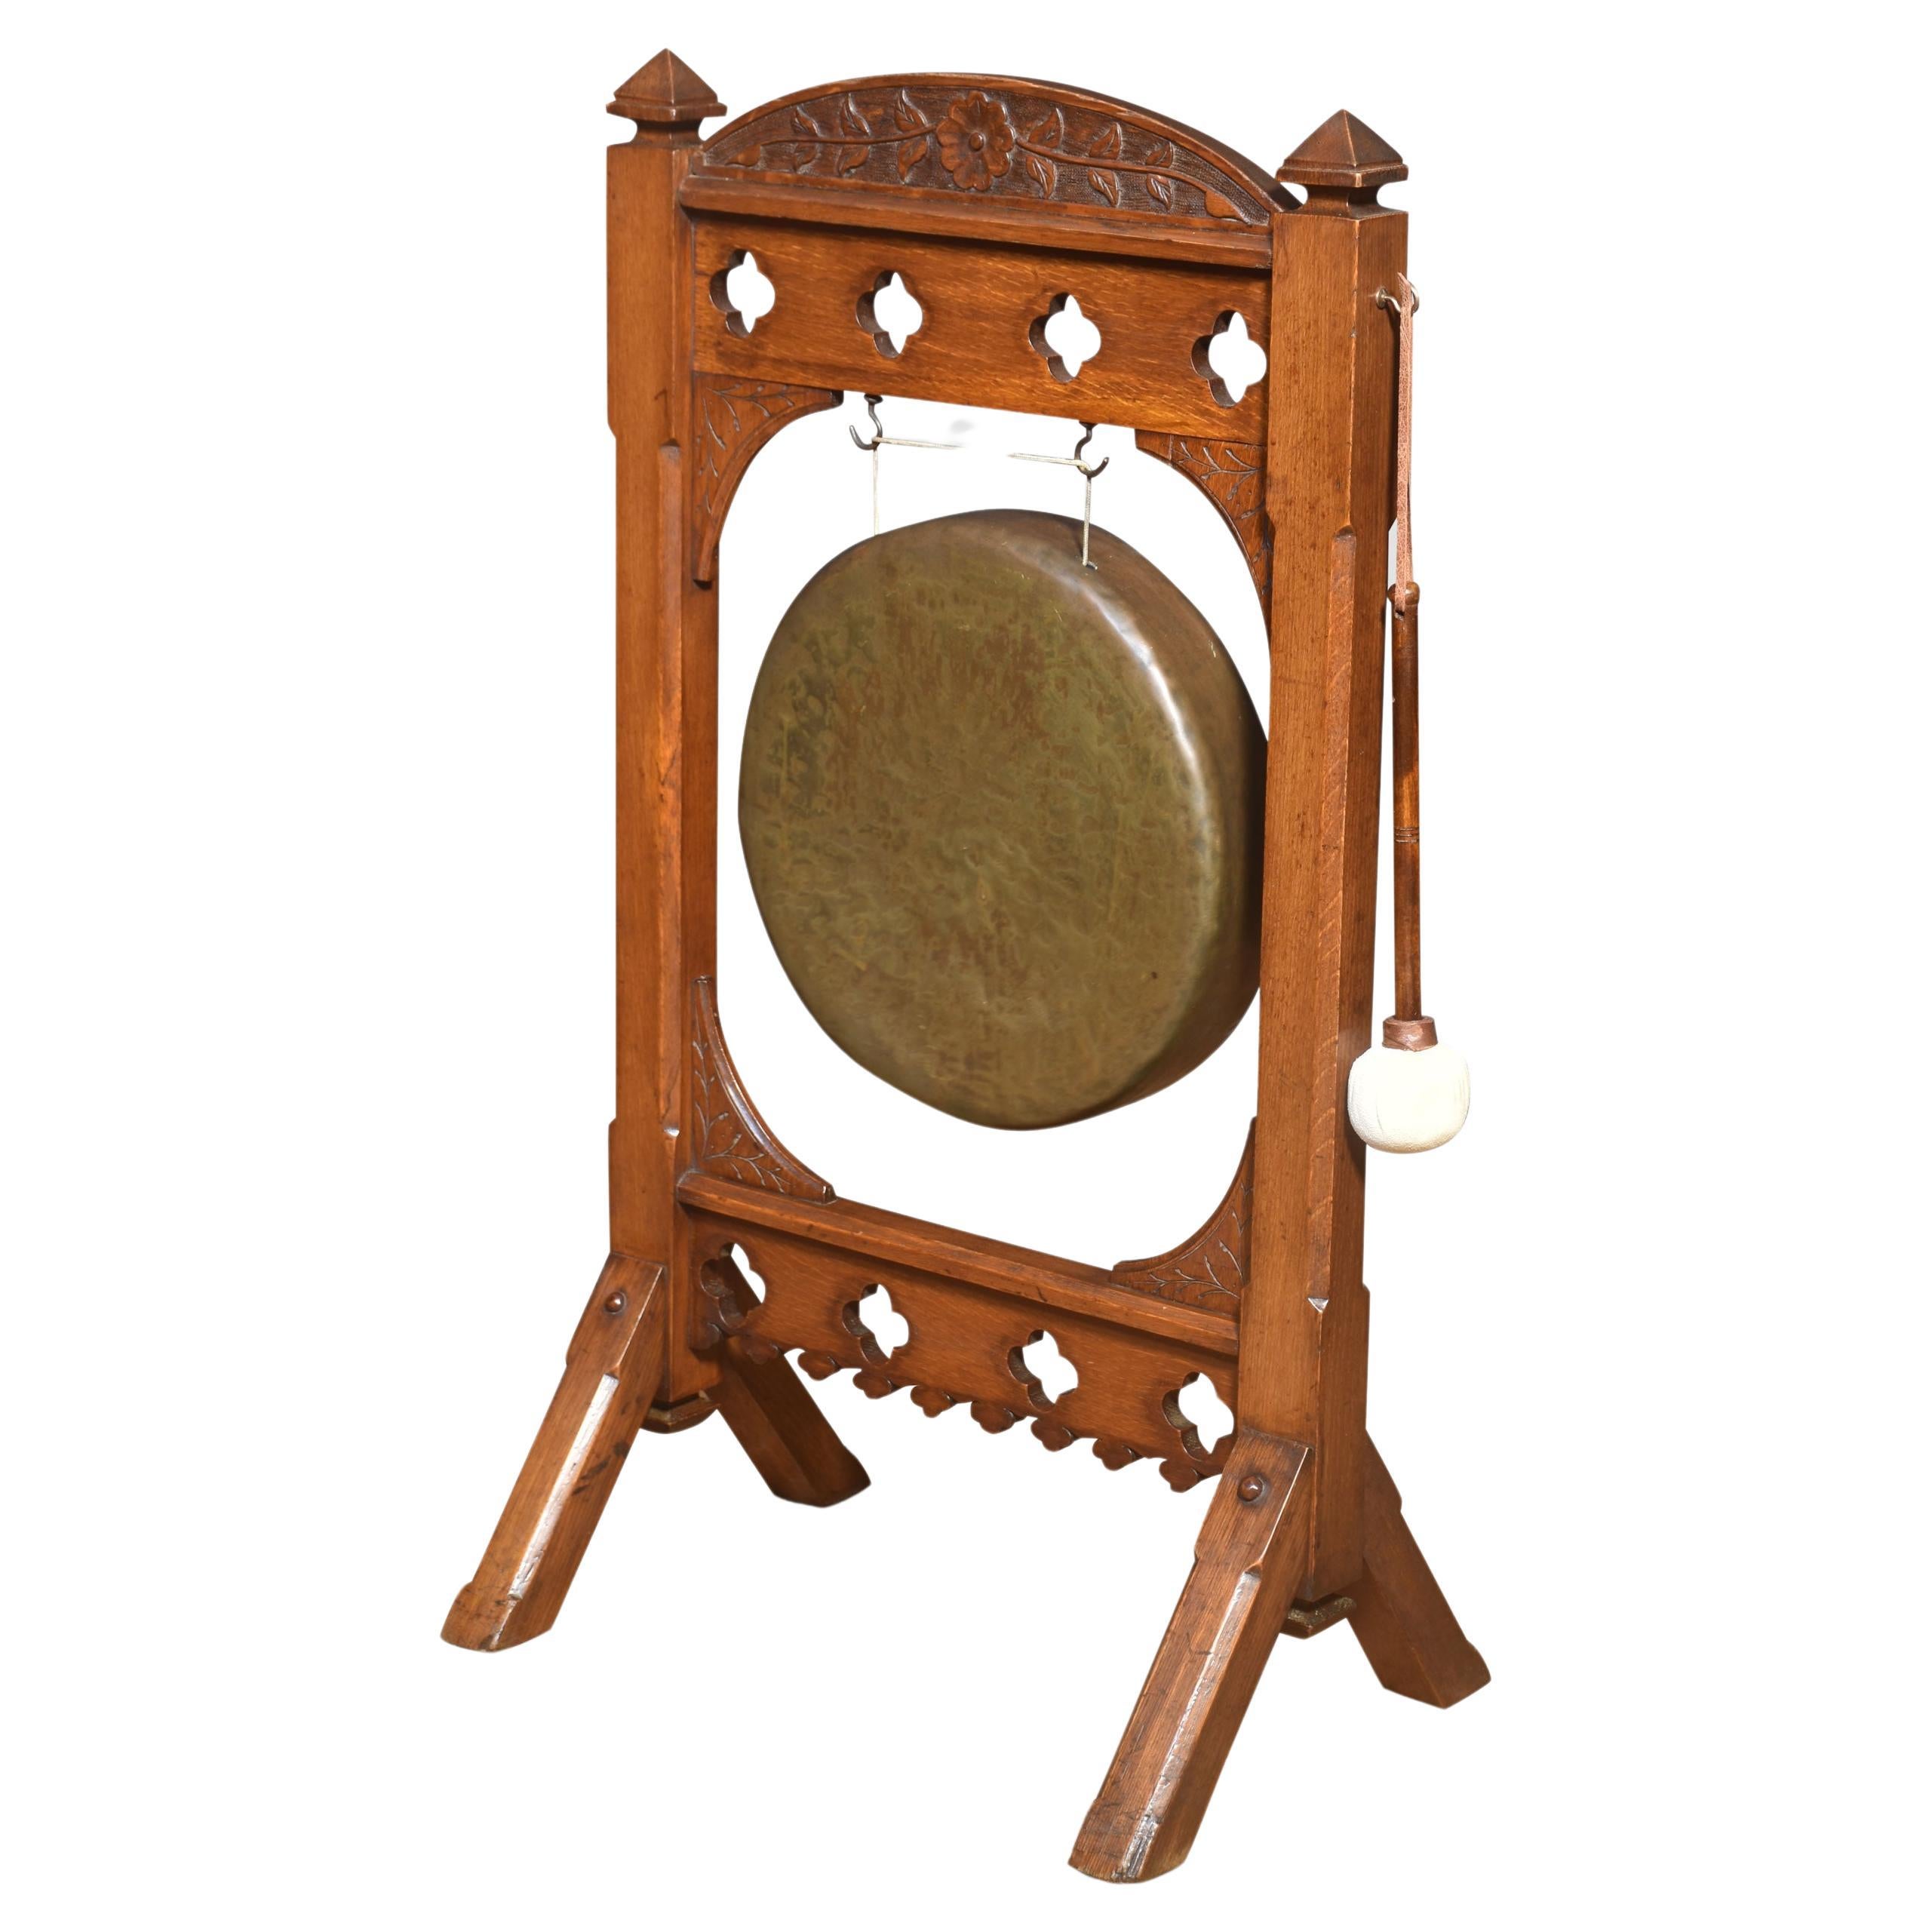 Gothic revival dinner gong For Sale